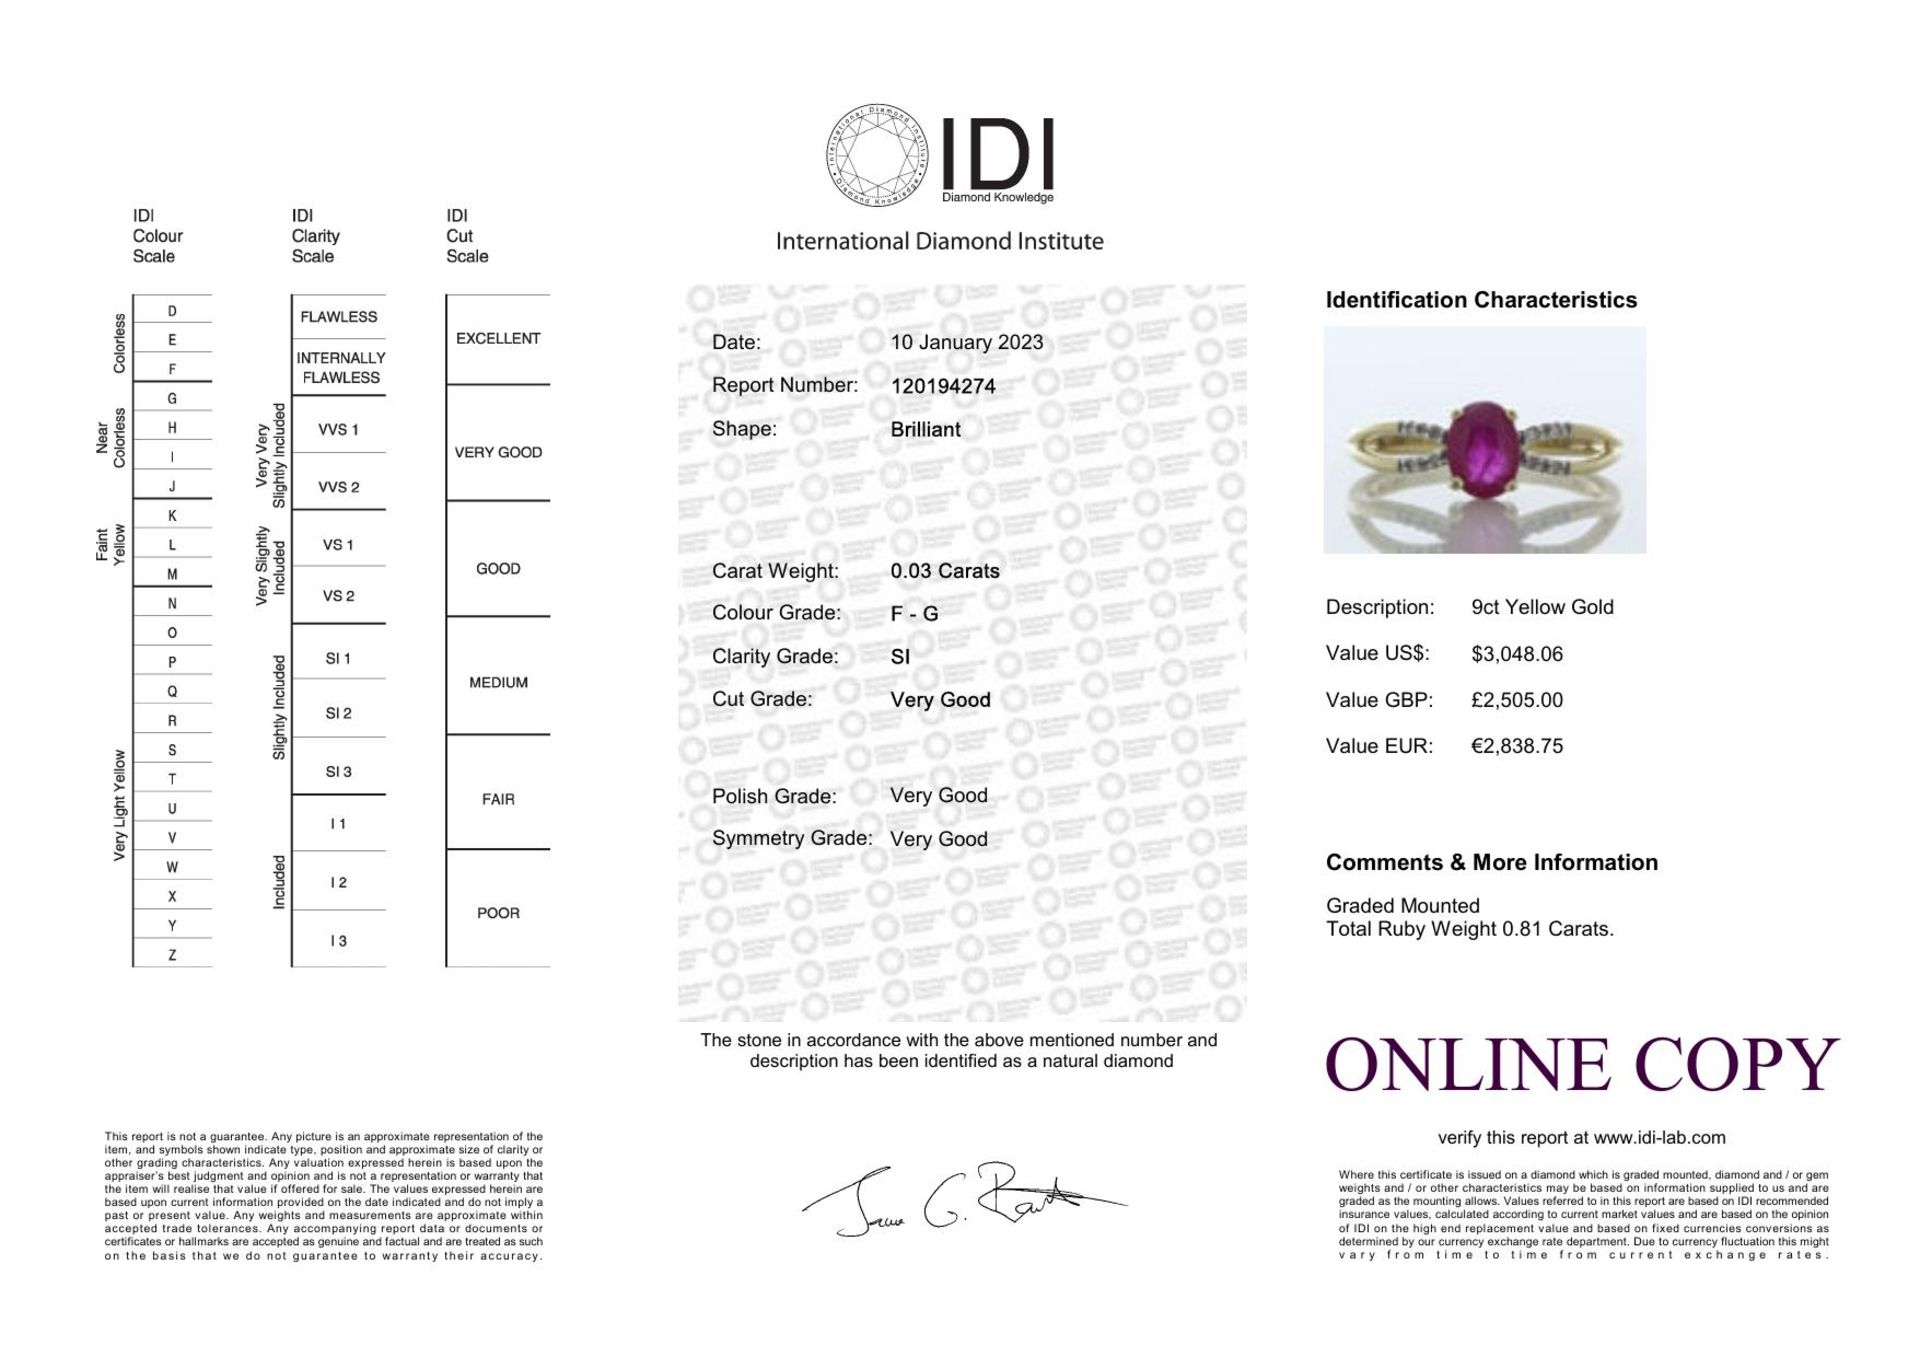 9ct Yellow Gold Diamond And Ruby Ring (R0.81) 0.03 Carats - Valued By IDI £2,505.00 - An oval 8mm - Image 4 of 4